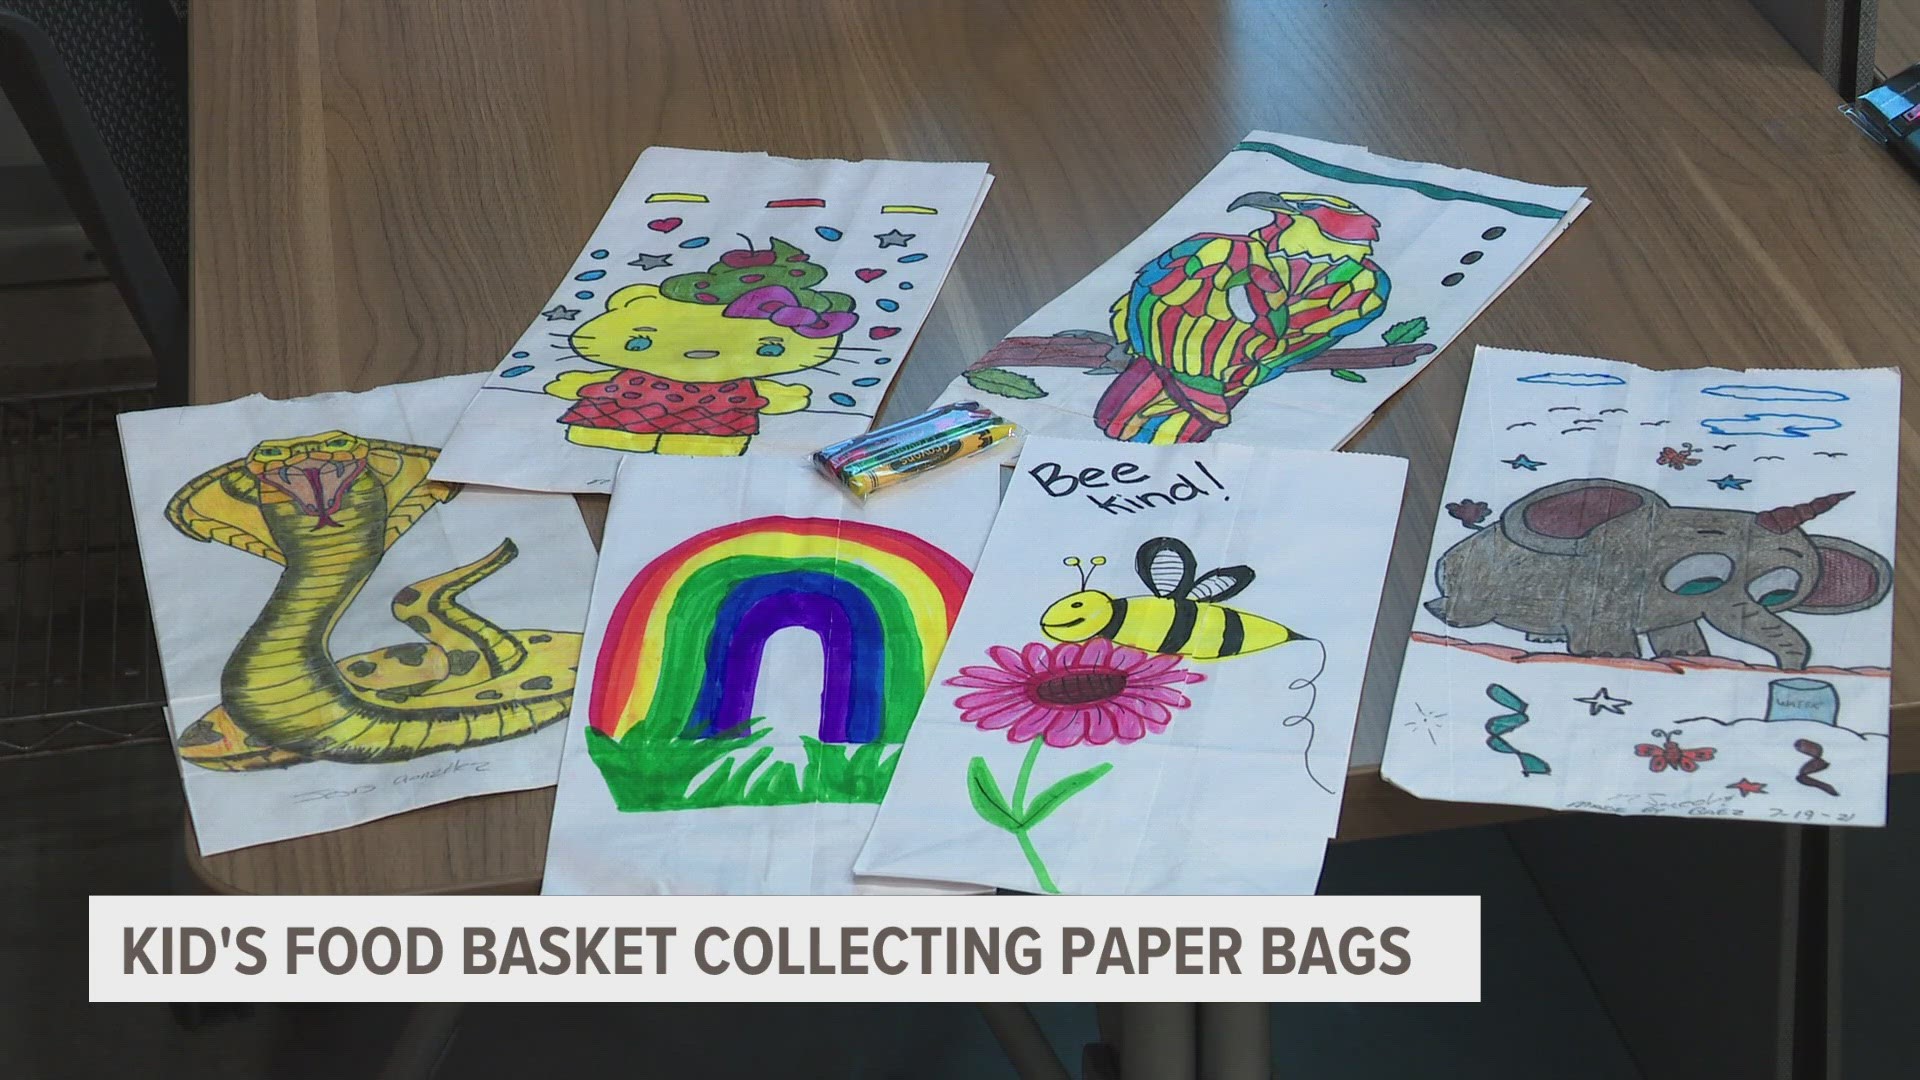 Kid's Food Basket is looking to collect 200-thousand decorated paper bags by the end of the month.